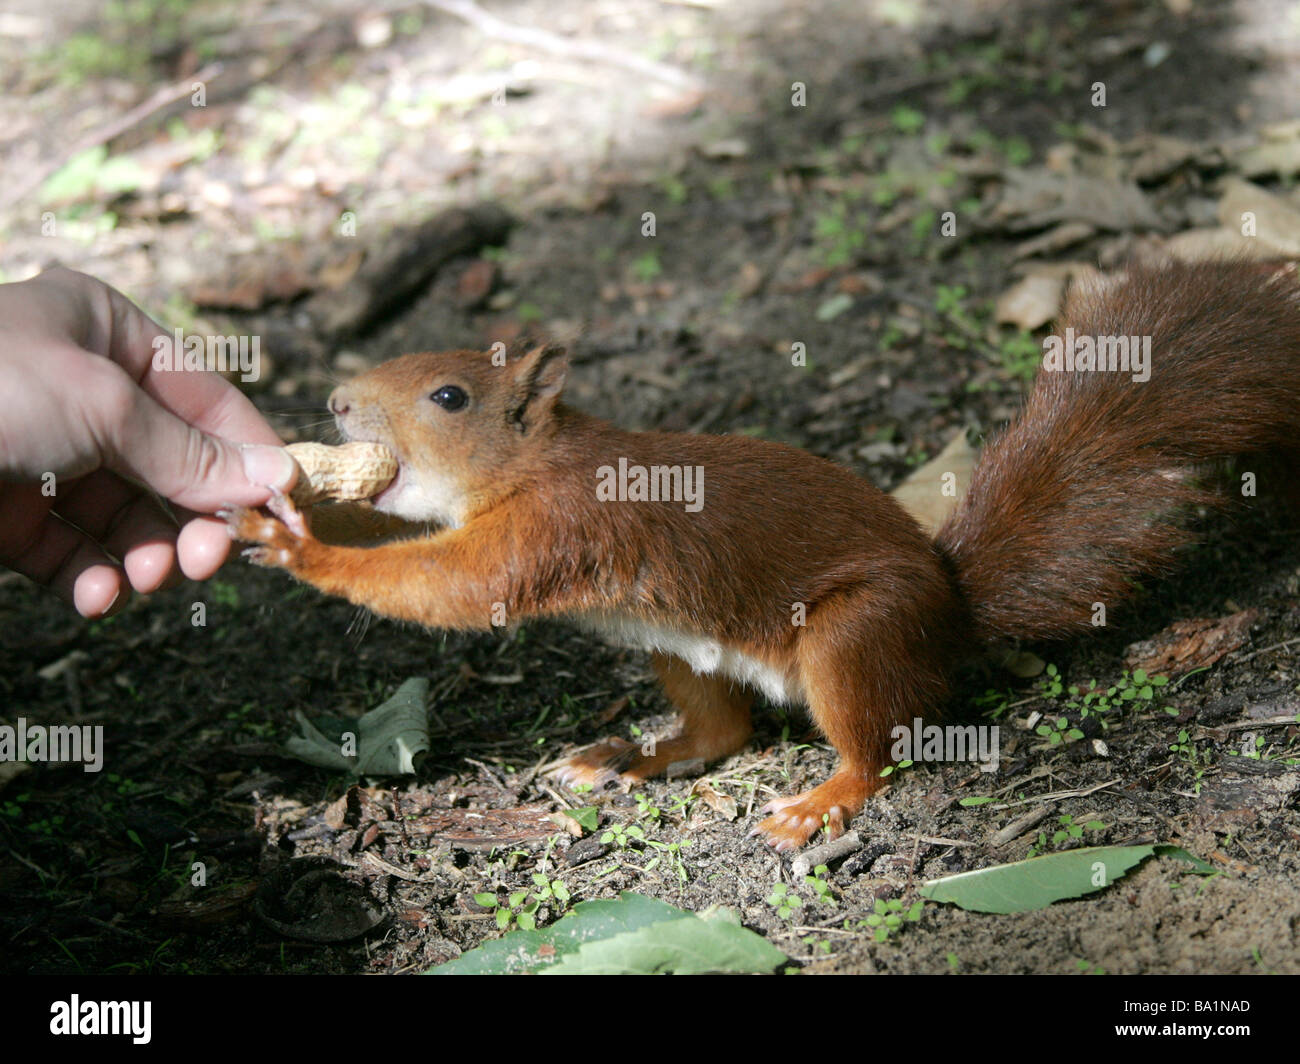 A tame red squirrel taking a nut from someone's hand Stock Photo